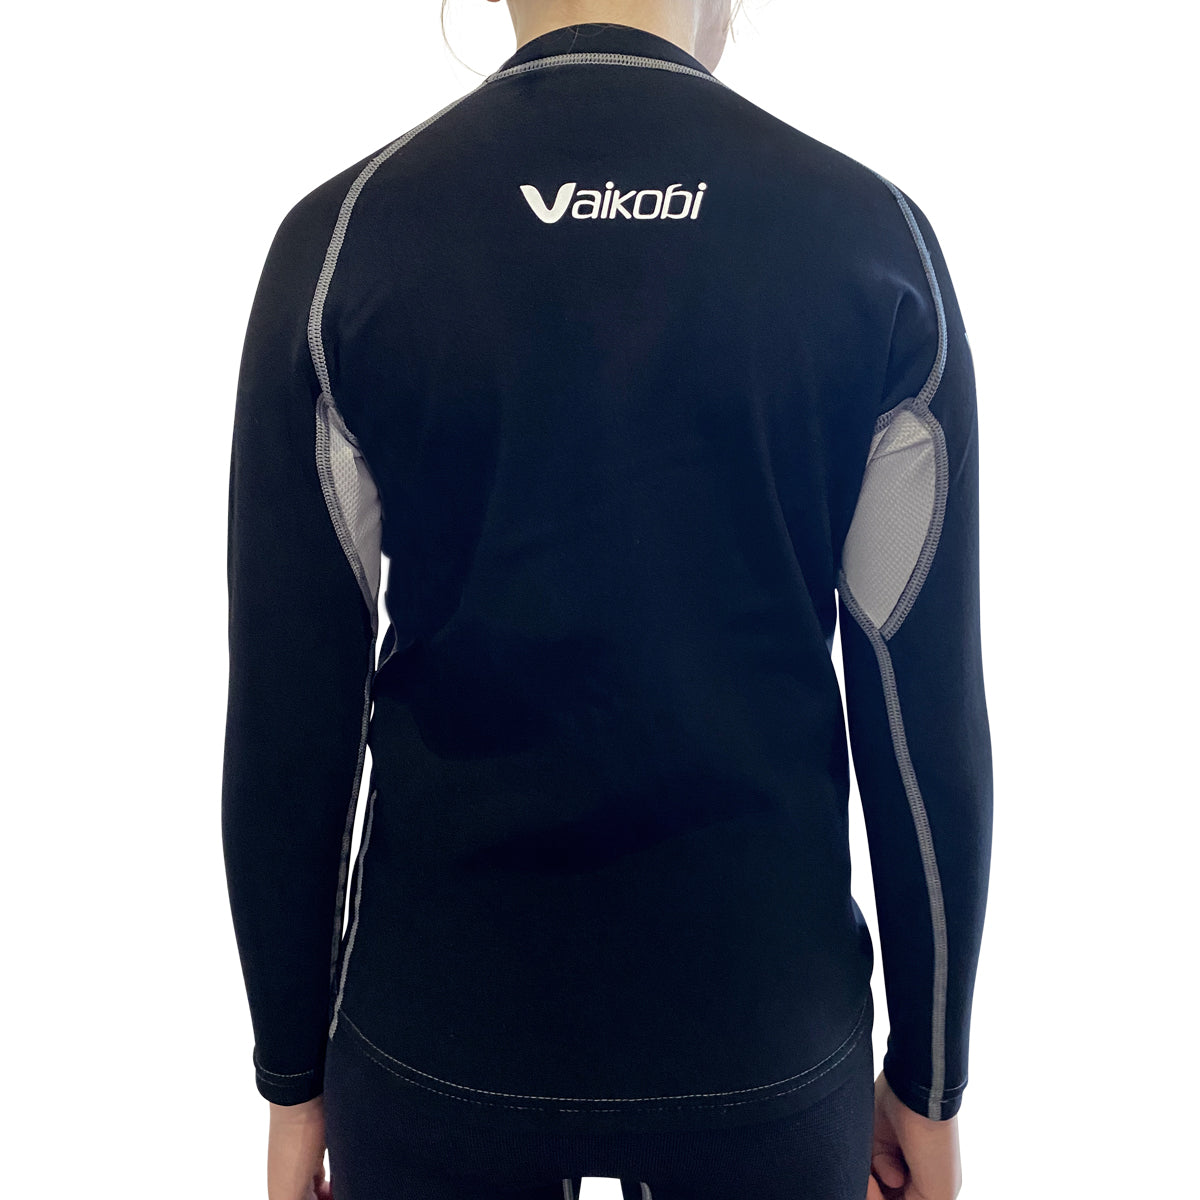 Youth VCOLD Hydroflex Top - Black